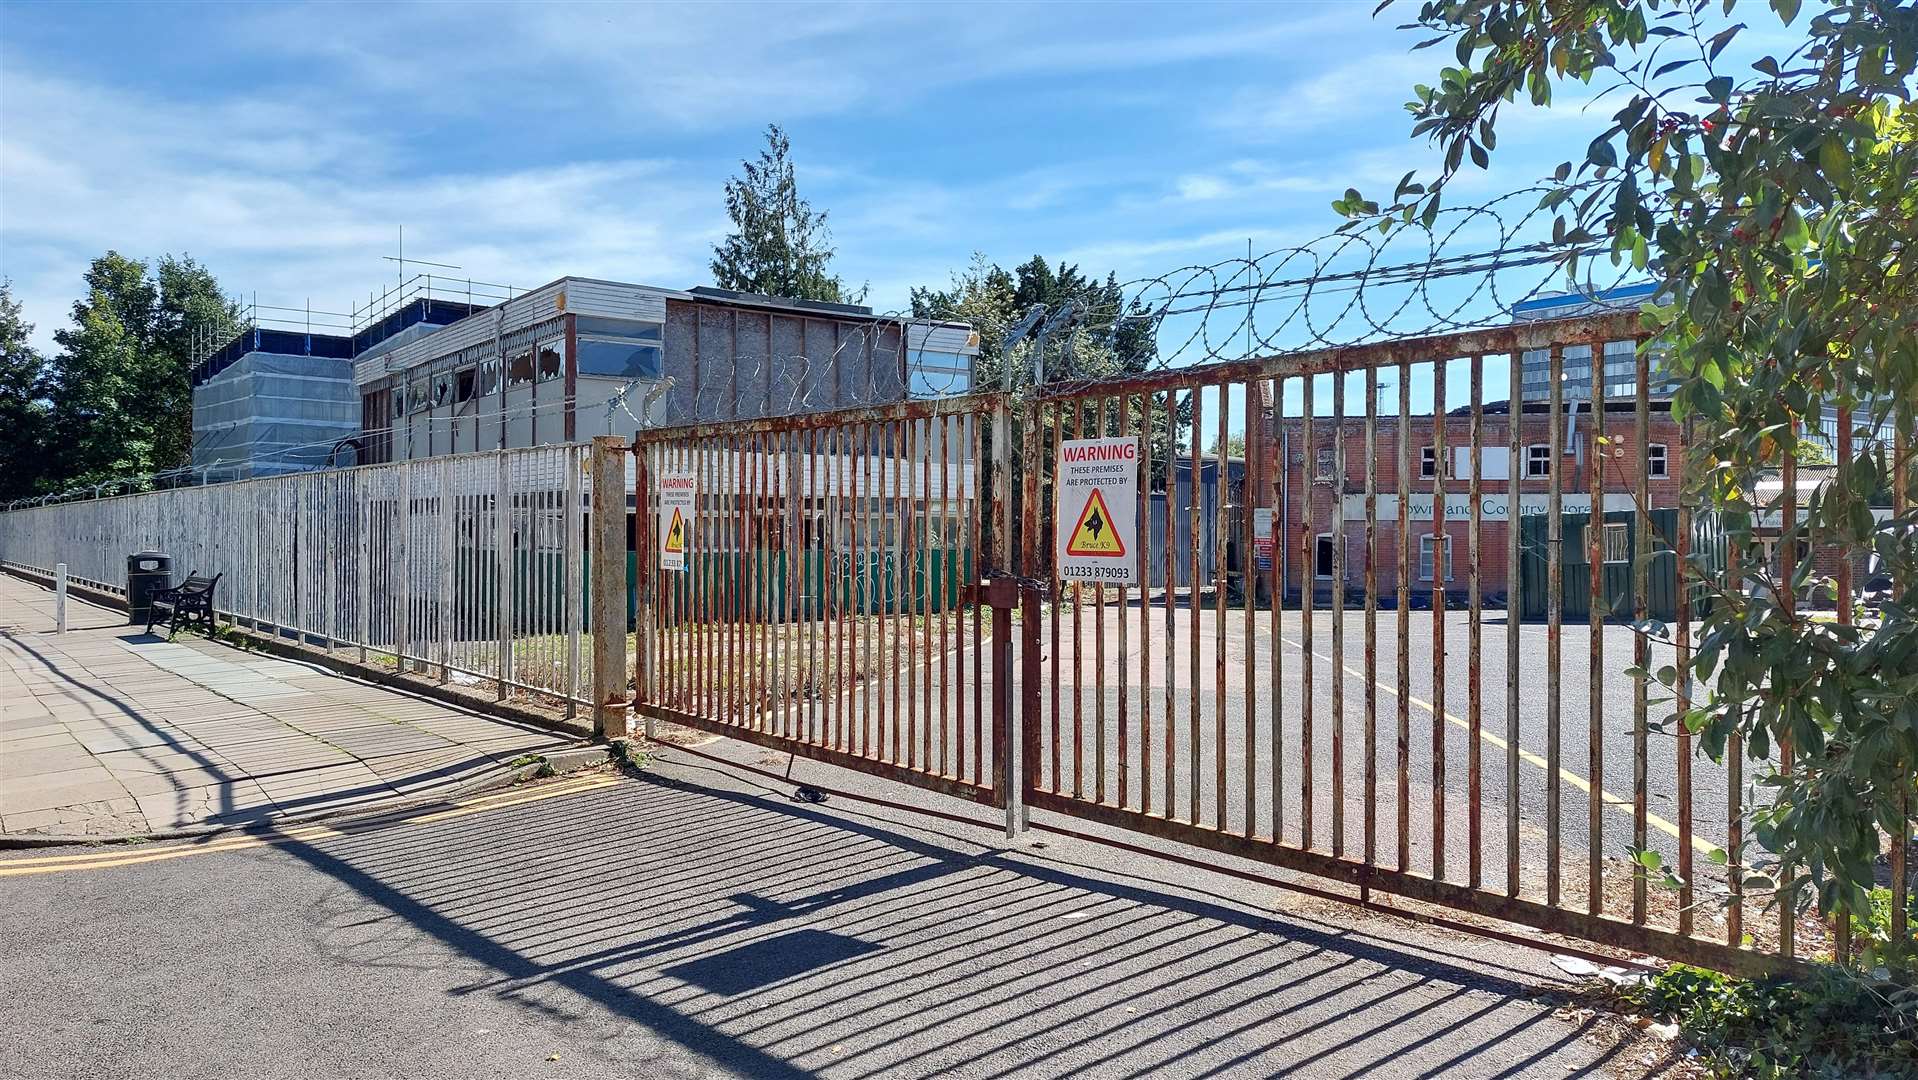 The fenced-off site in Tannery Lane goes across 2.9 acres